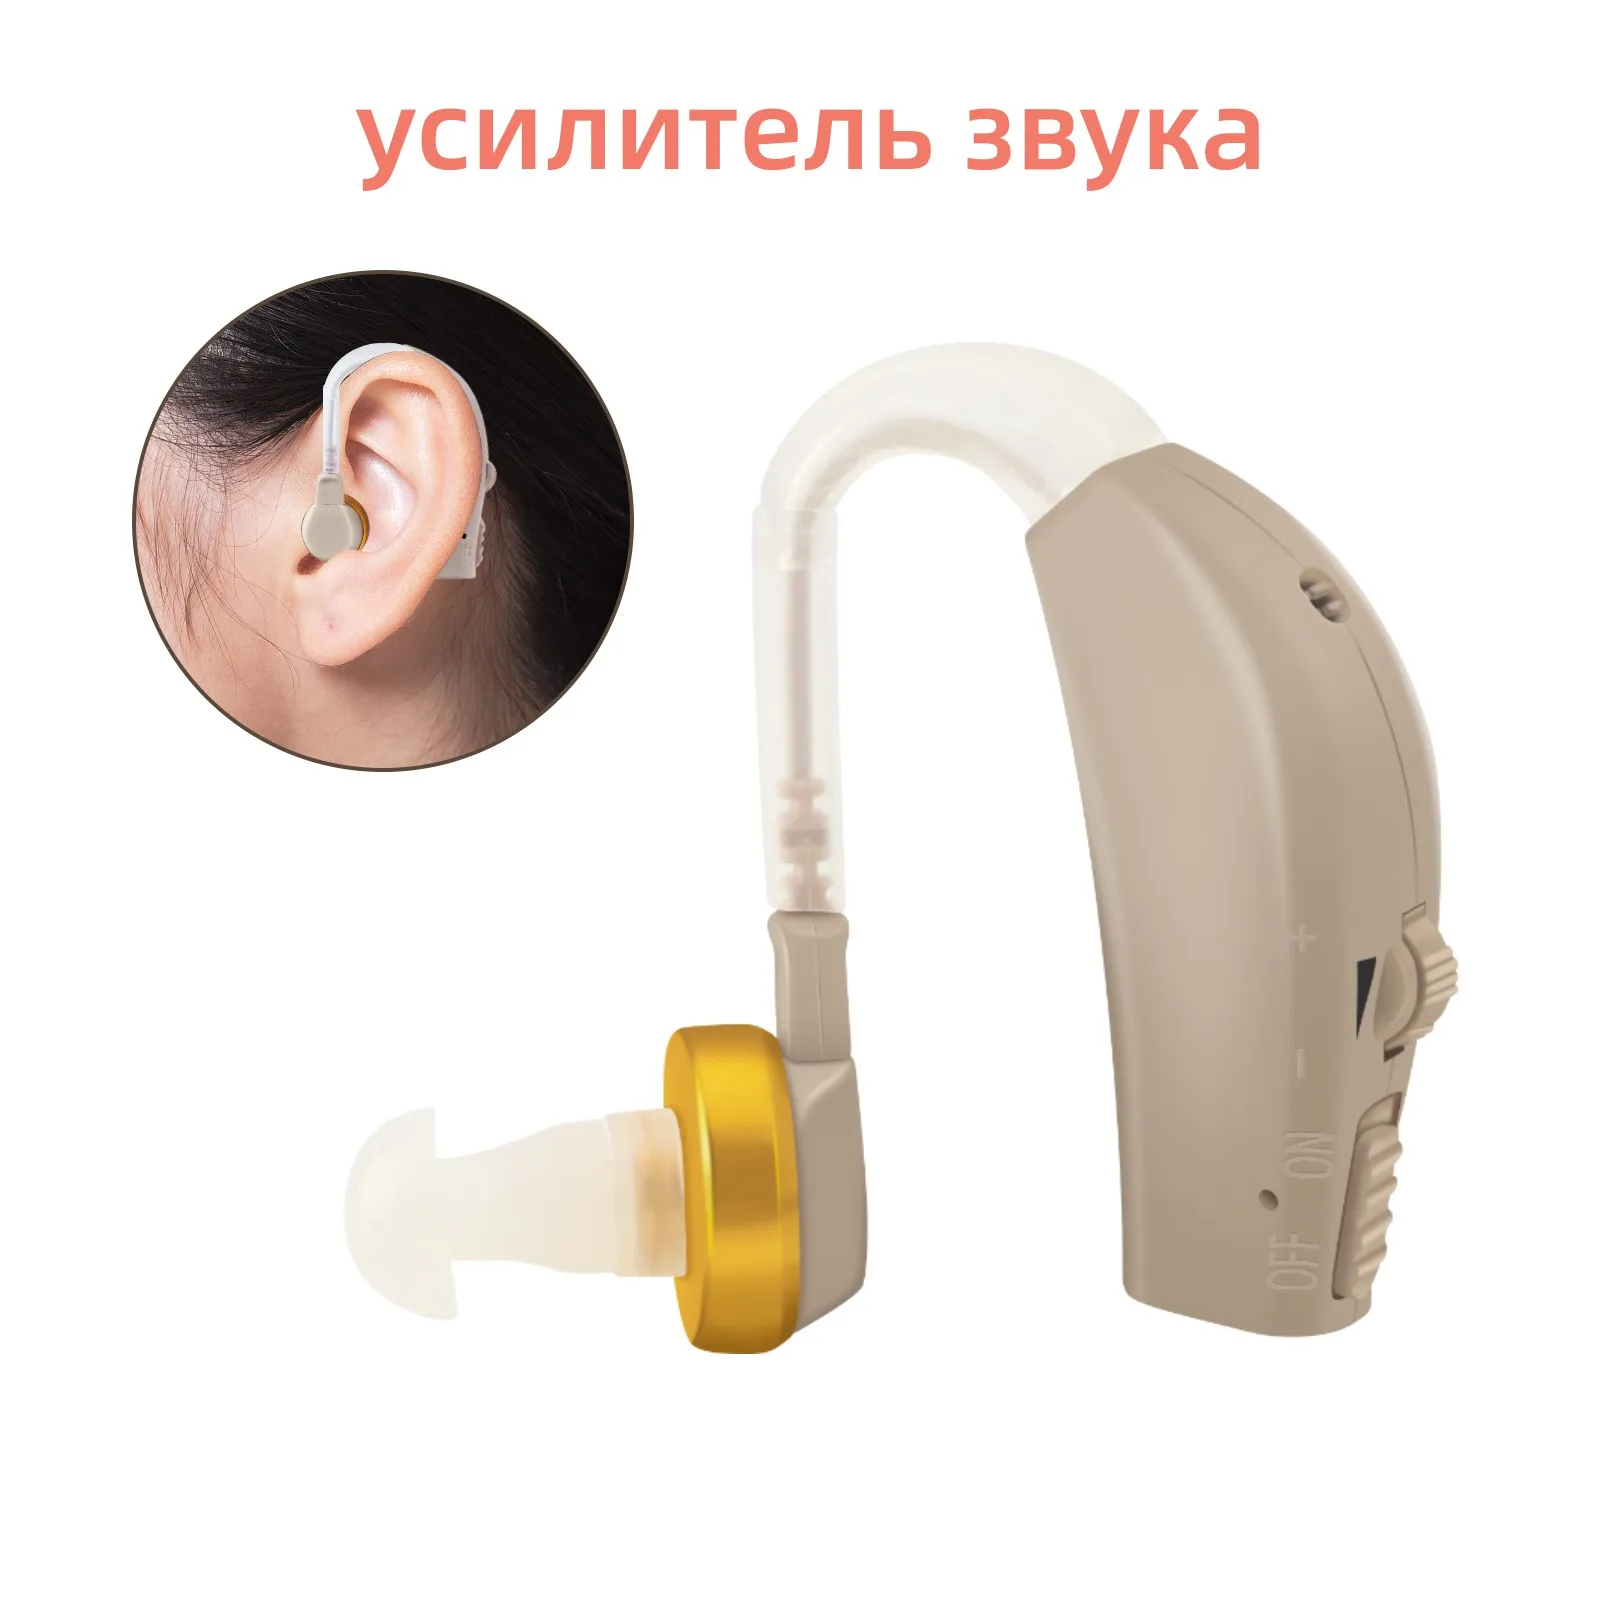 

Hearing Aid Small Hearing Aids for the elderly Best Sound Voice Amplifier Invisible Mini Convenient Behind Ear усилитель звука